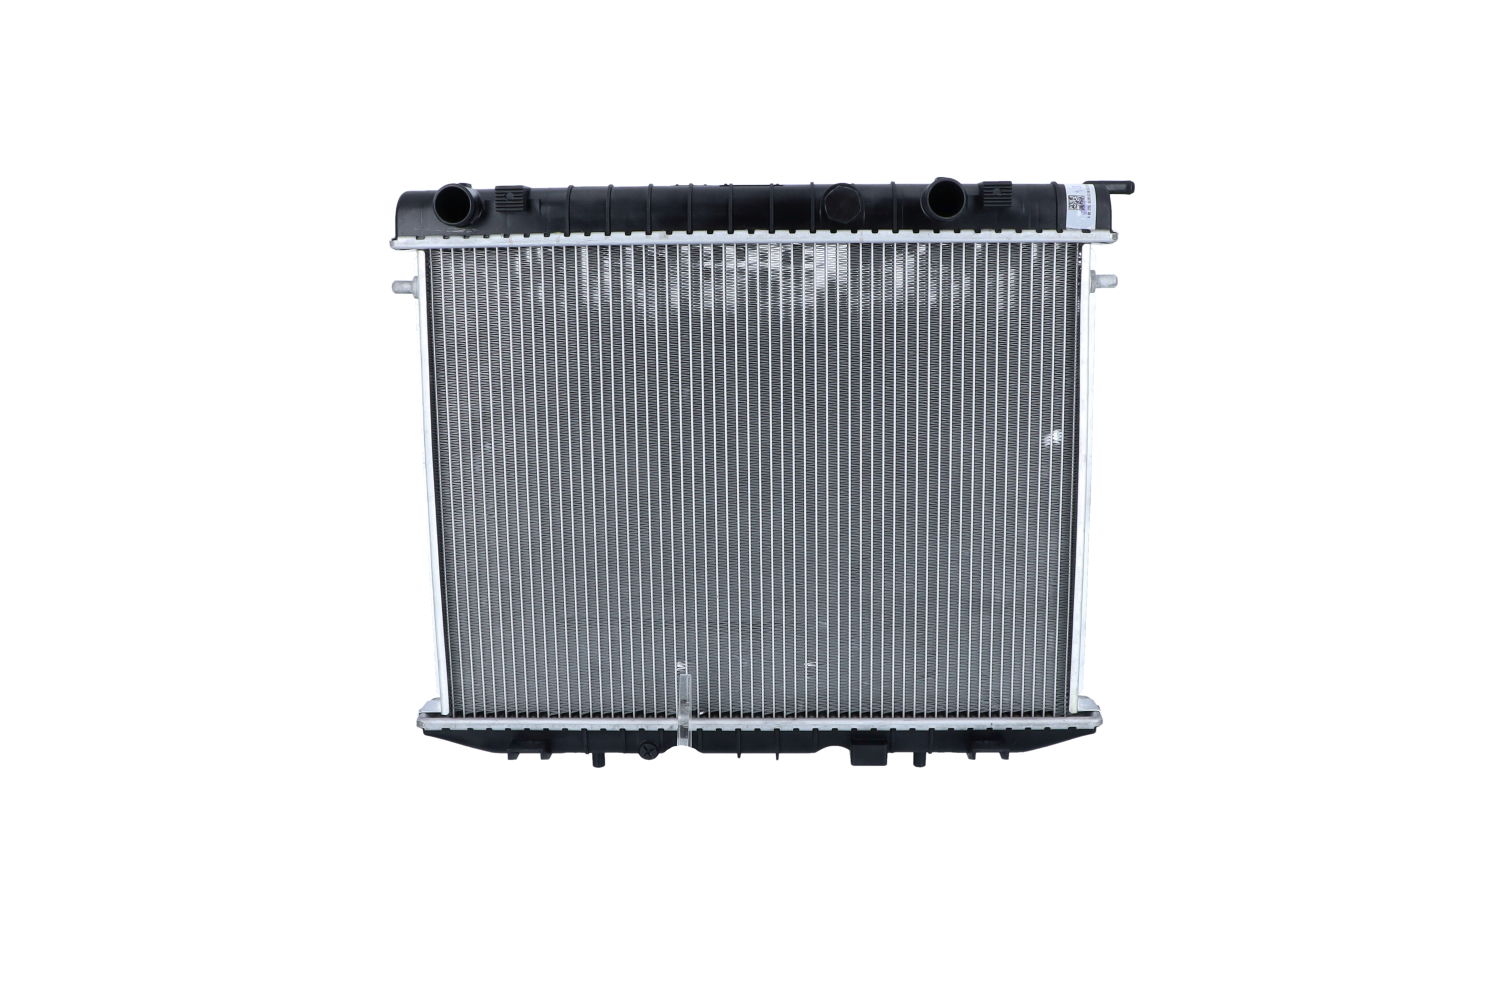 NRF 509532 Engine radiator Aluminium, 584 x 423 x 34 mm, with mounting parts, Brazed cooling fins